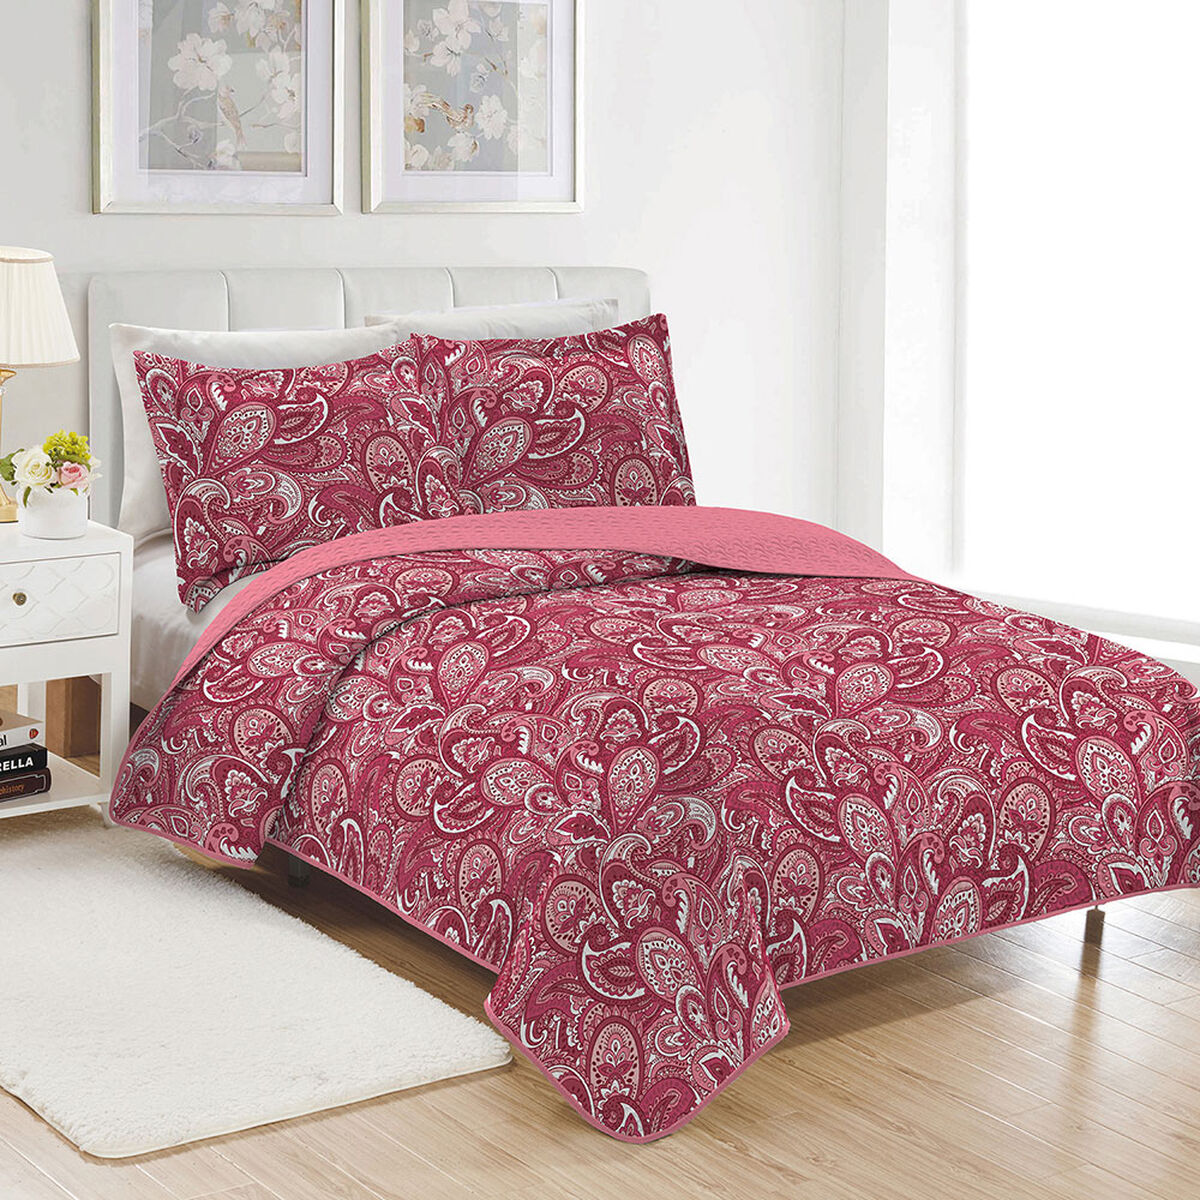 Quilt Paisley King